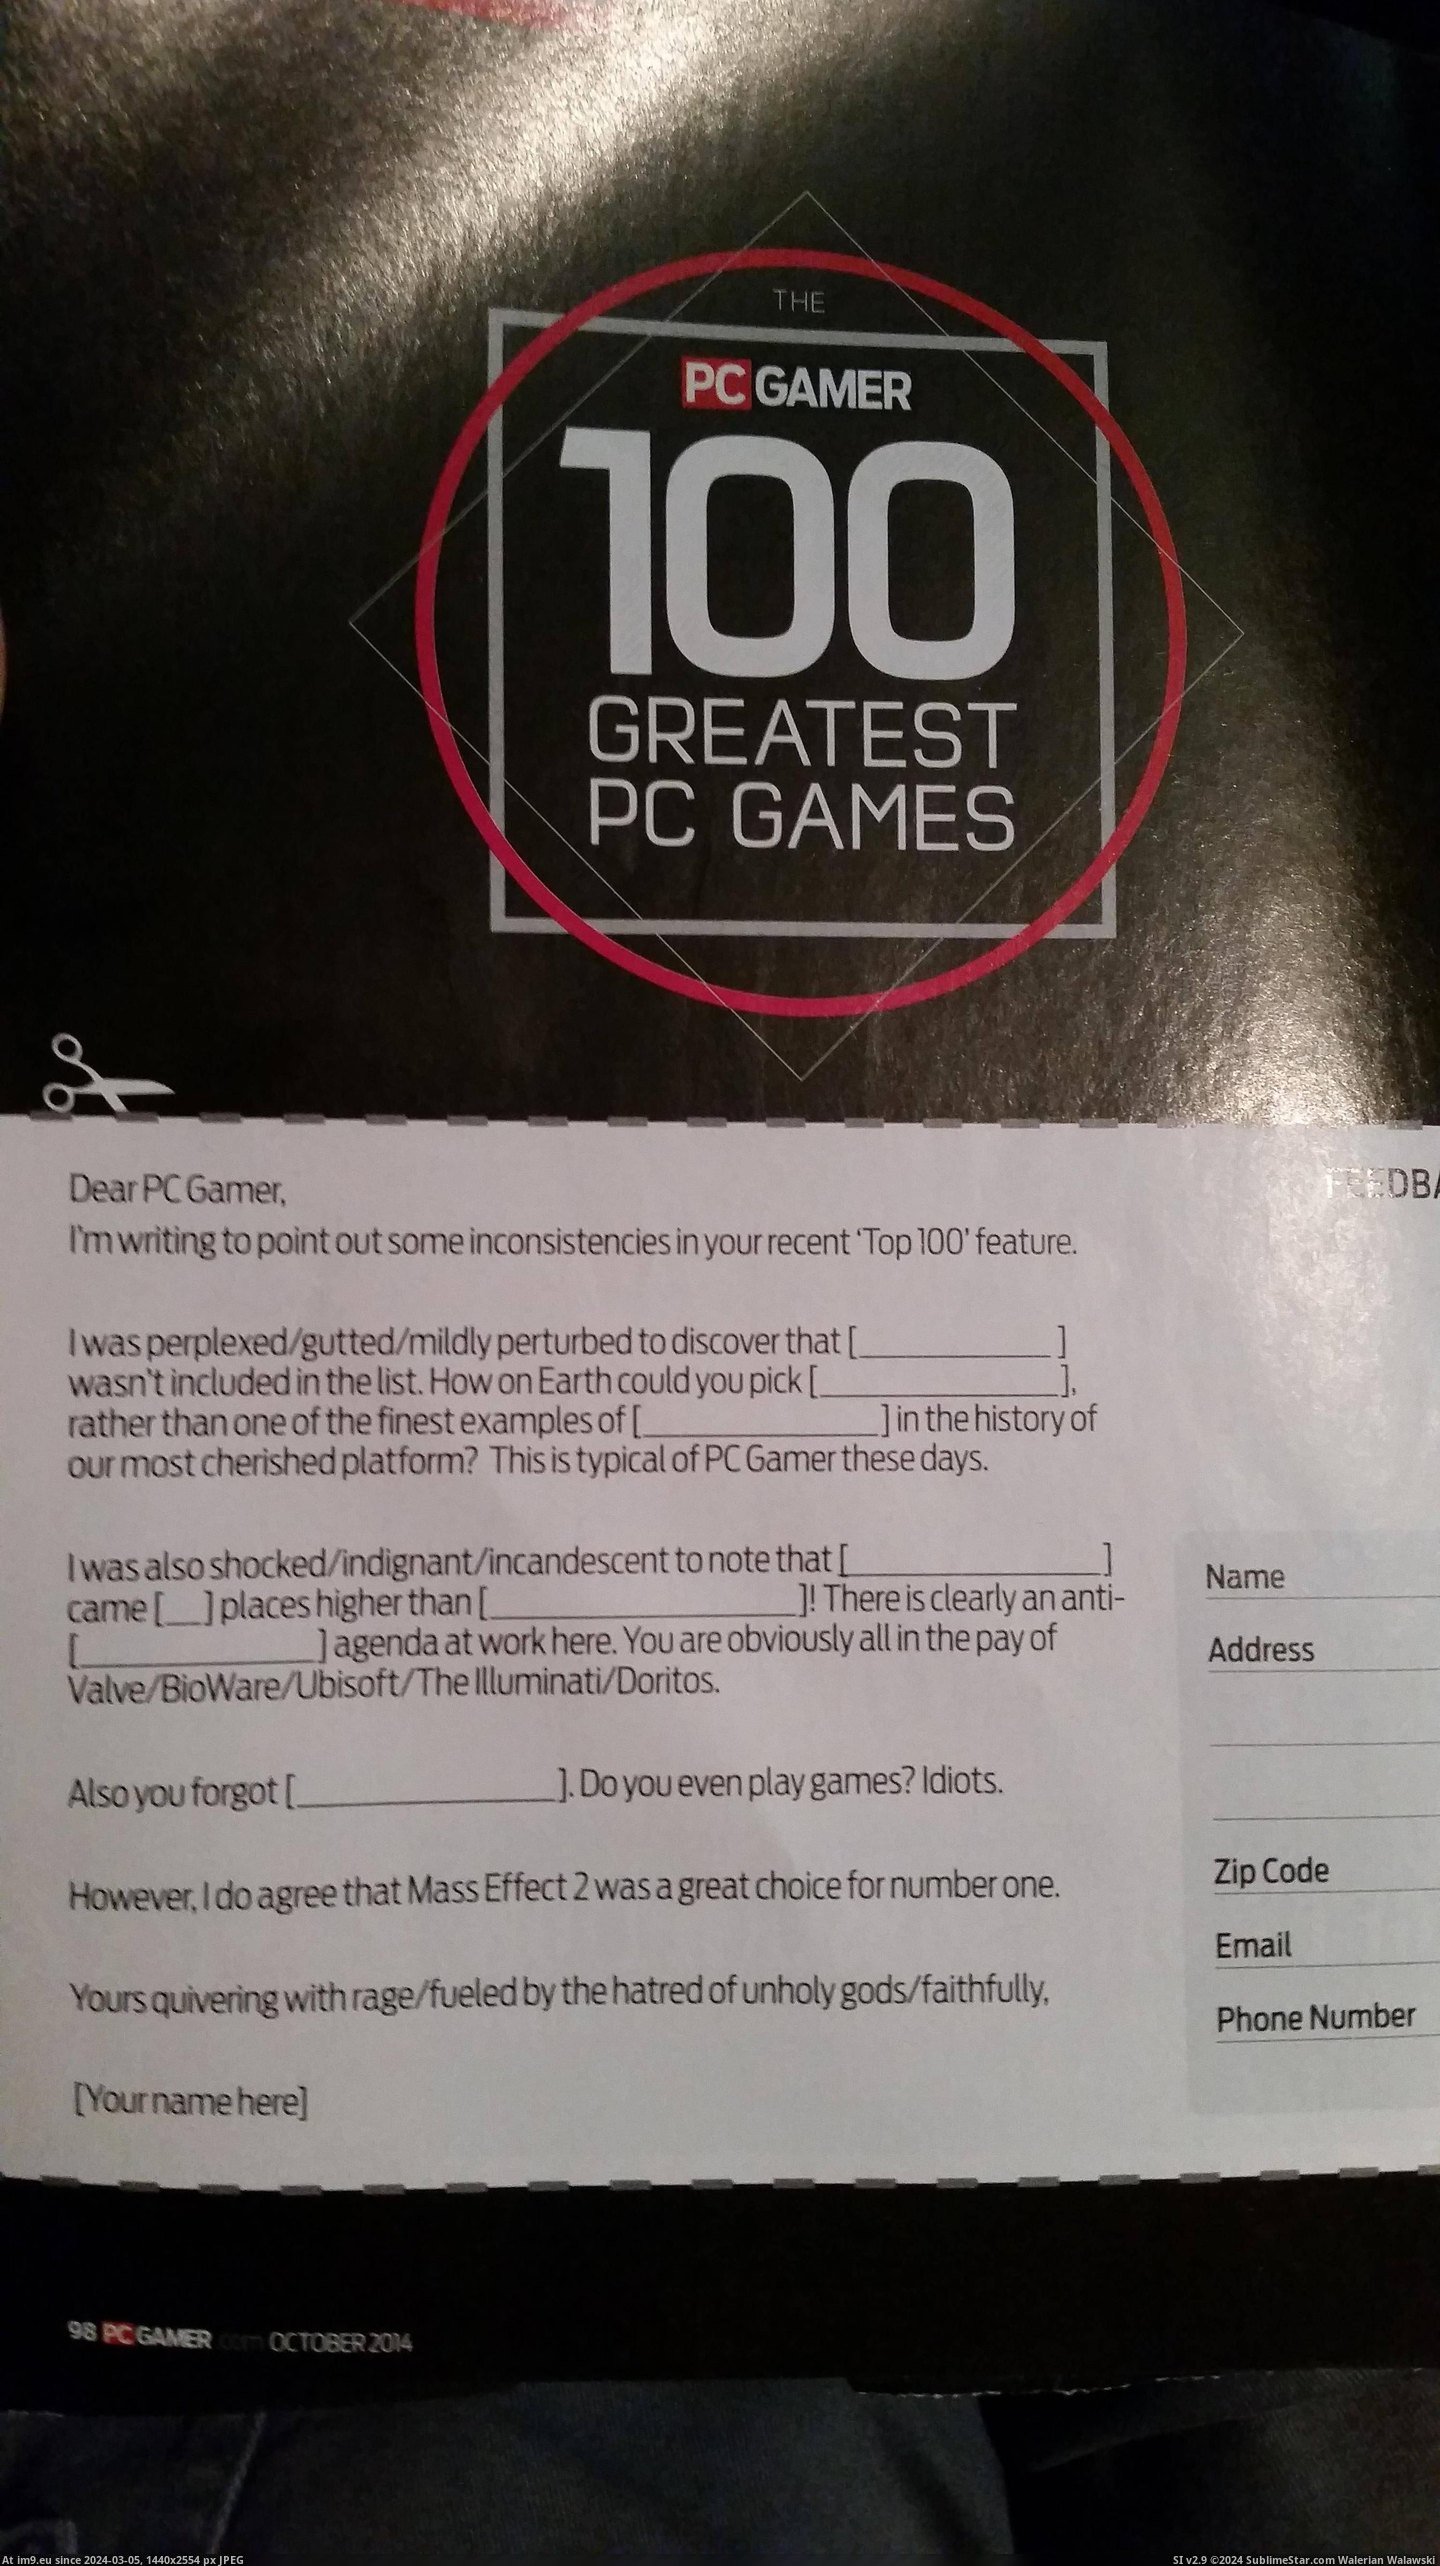 #Gaming #Top #Games #Greatest #Gamer #List #Magazine #Included #Latest [Gaming] In the back of the latest PC Gamer Magazine, which included a list of their Top 100 Greatest PC Games Pic. (Изображение из альбом My r/GAMING favs))